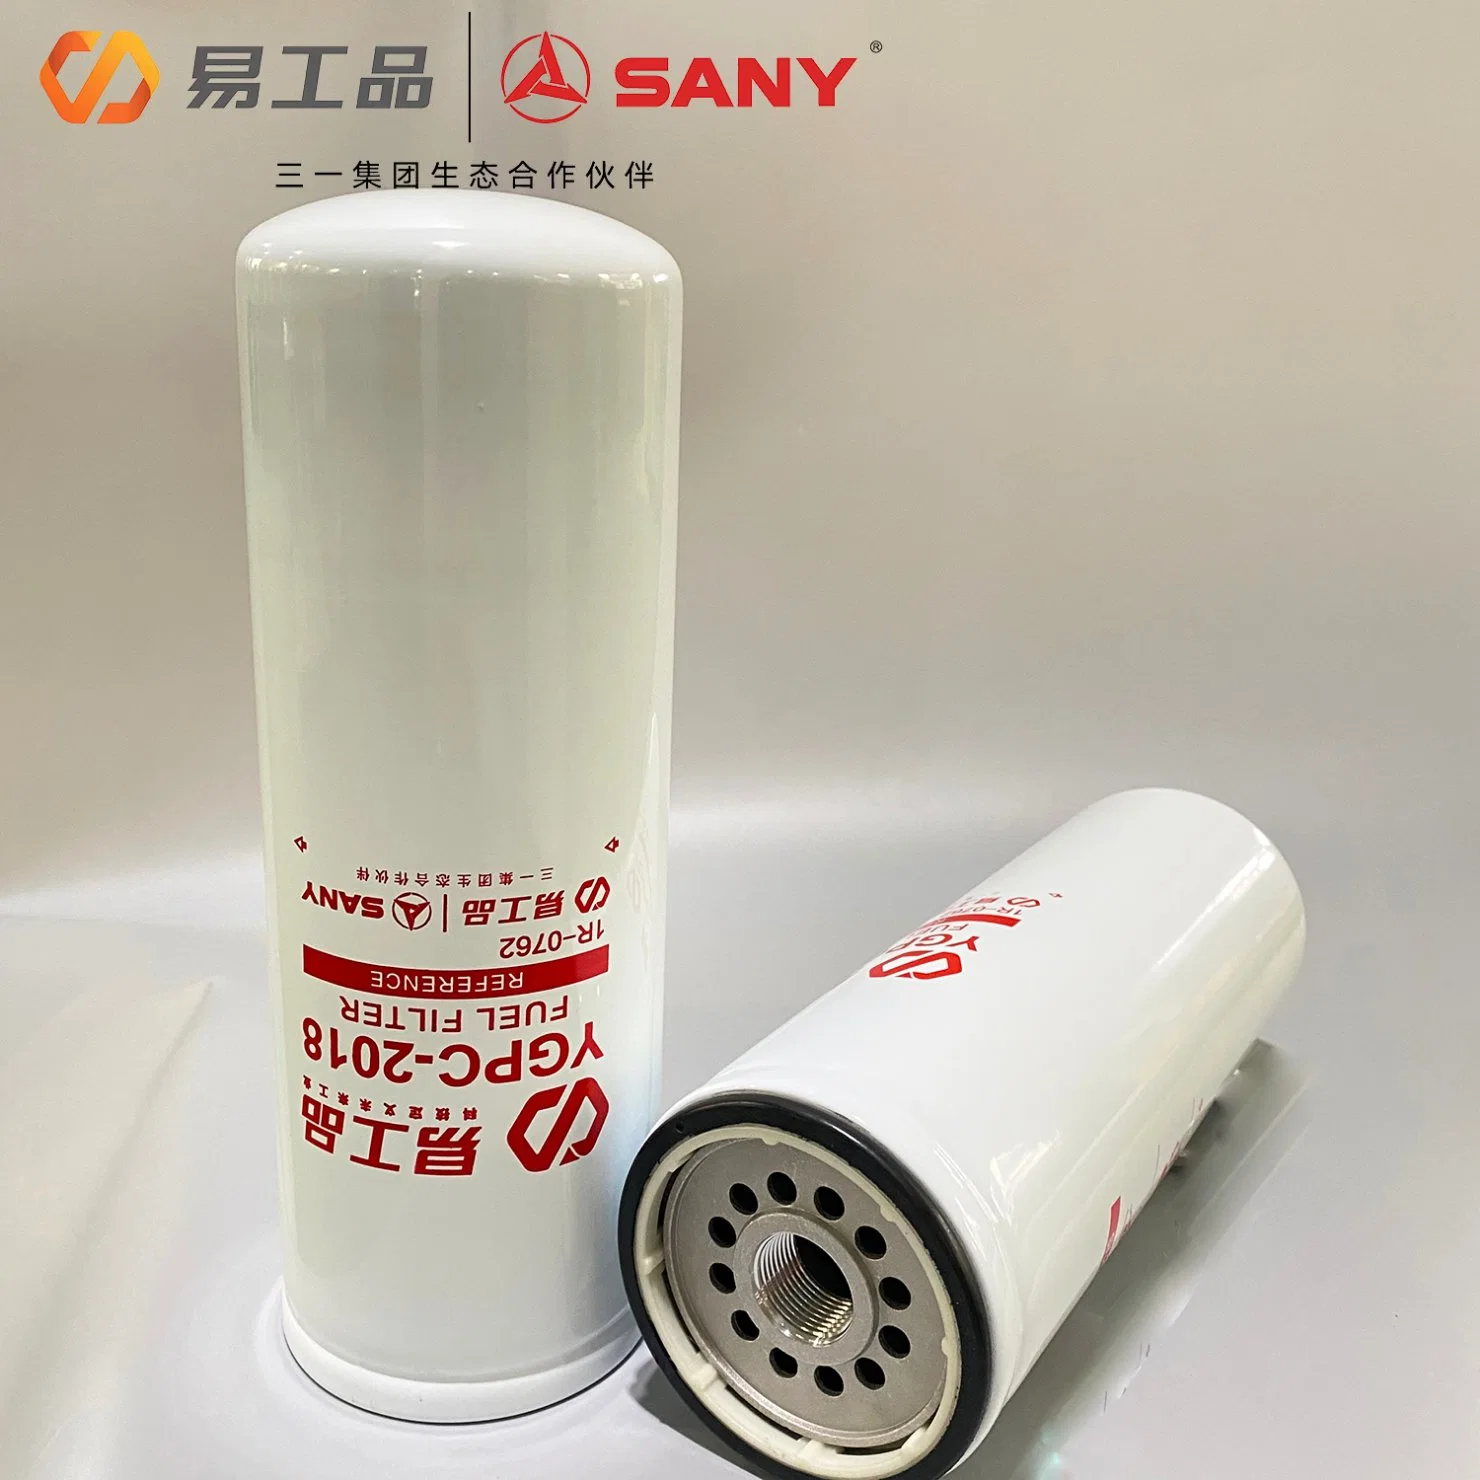 Engine Parts Diesel Filter Oil Filter Air Filter Is Suitable for Xe520d Xe550dk Excavator/Auto Parts